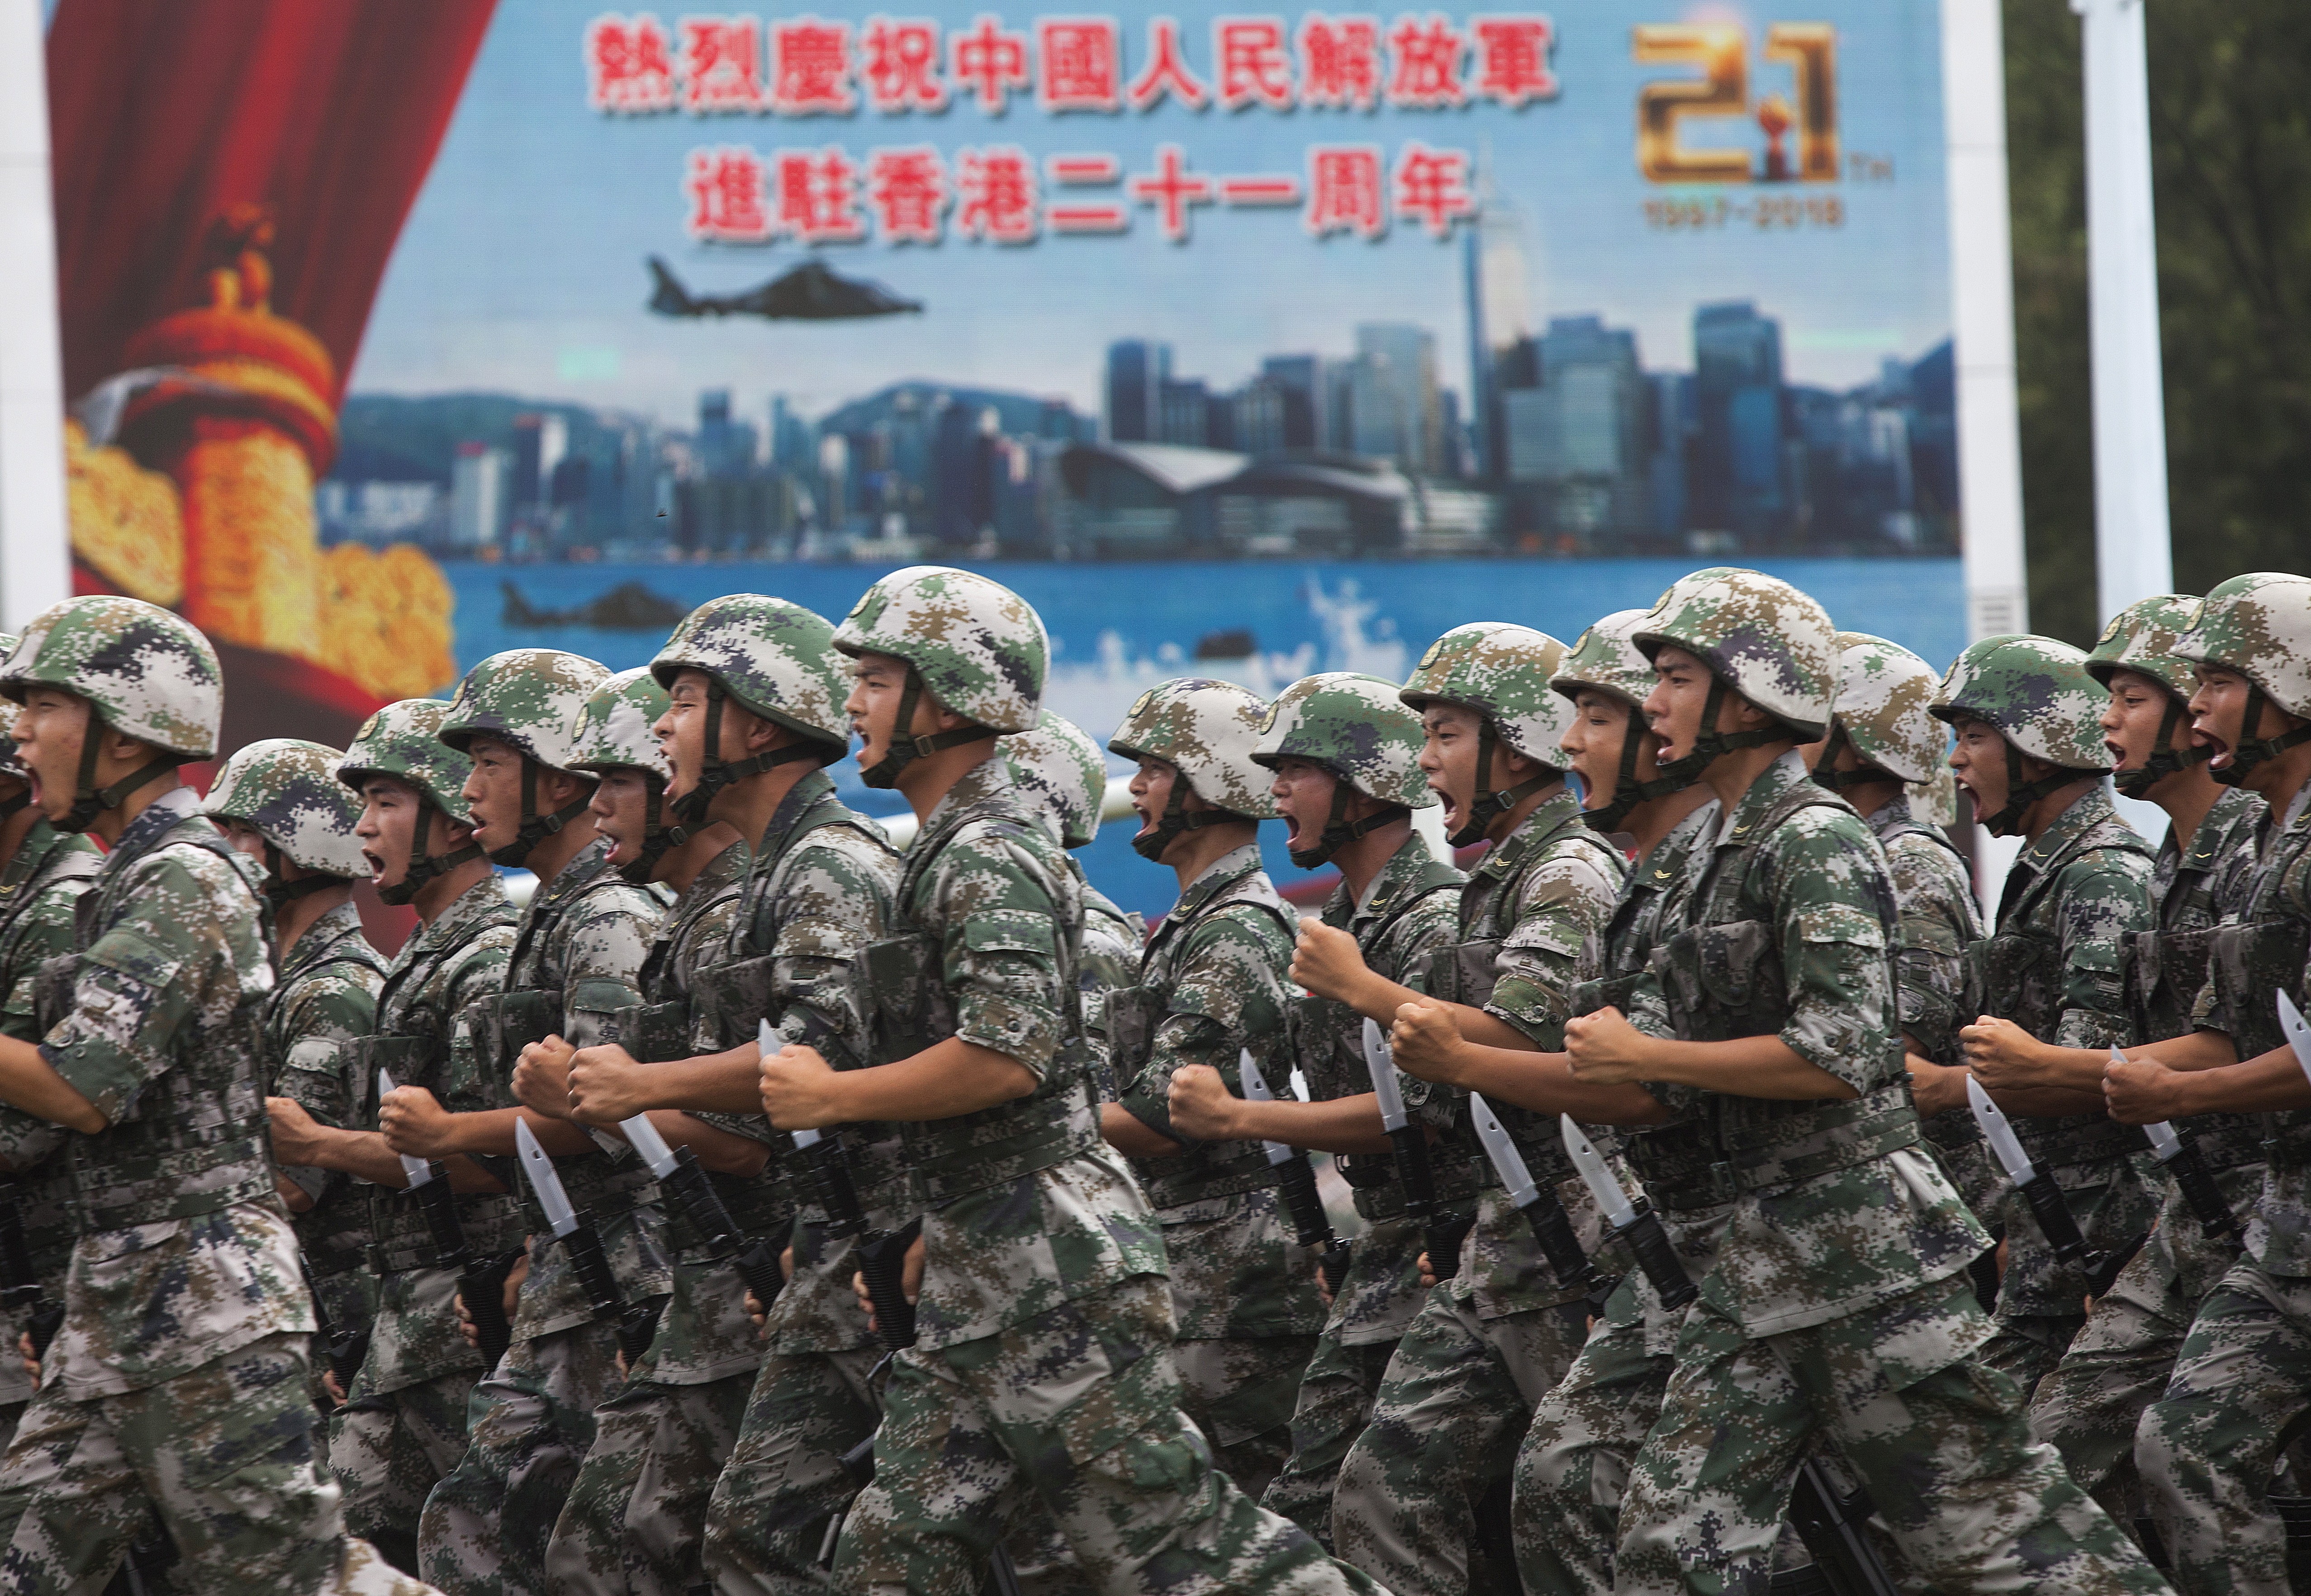 Soldiers demonstrate combat exercises at a PLA barracks open day to mark the 21st anniversary of Hong Kong’s return to China, at the Ngong Shuen Chau naval base in Kowloon, on July 1. Photo: EPA